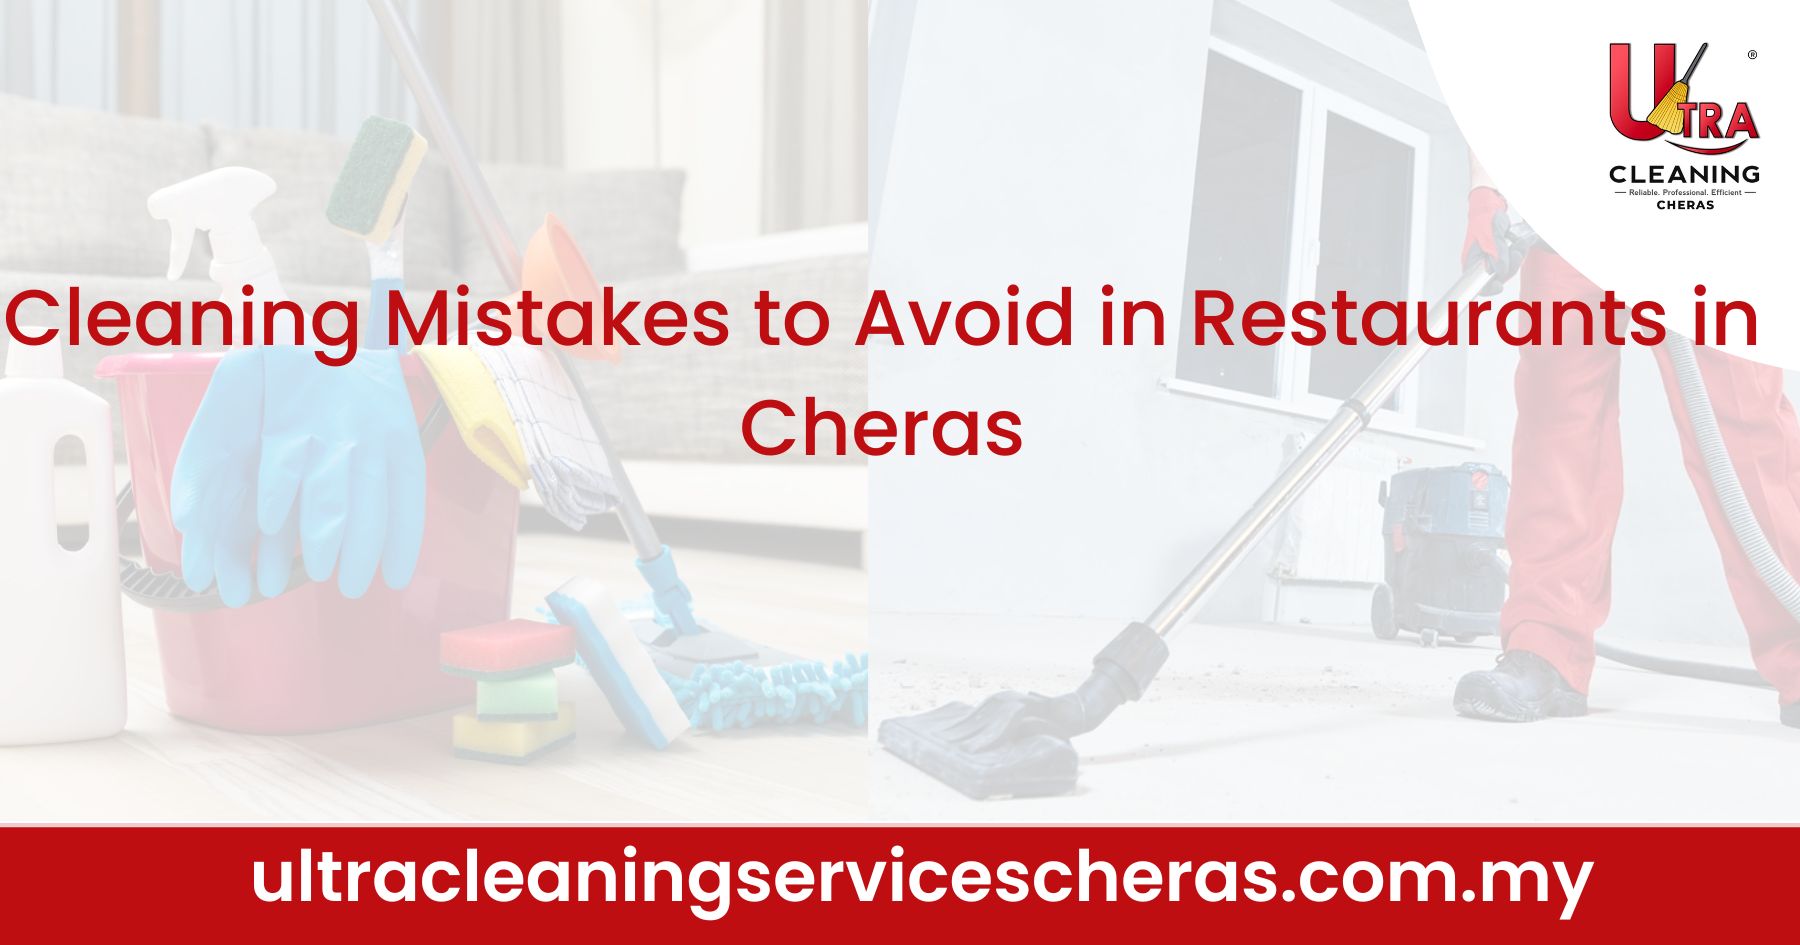 Cleaning Mistakes to Avoid in Restaurants in Cheras